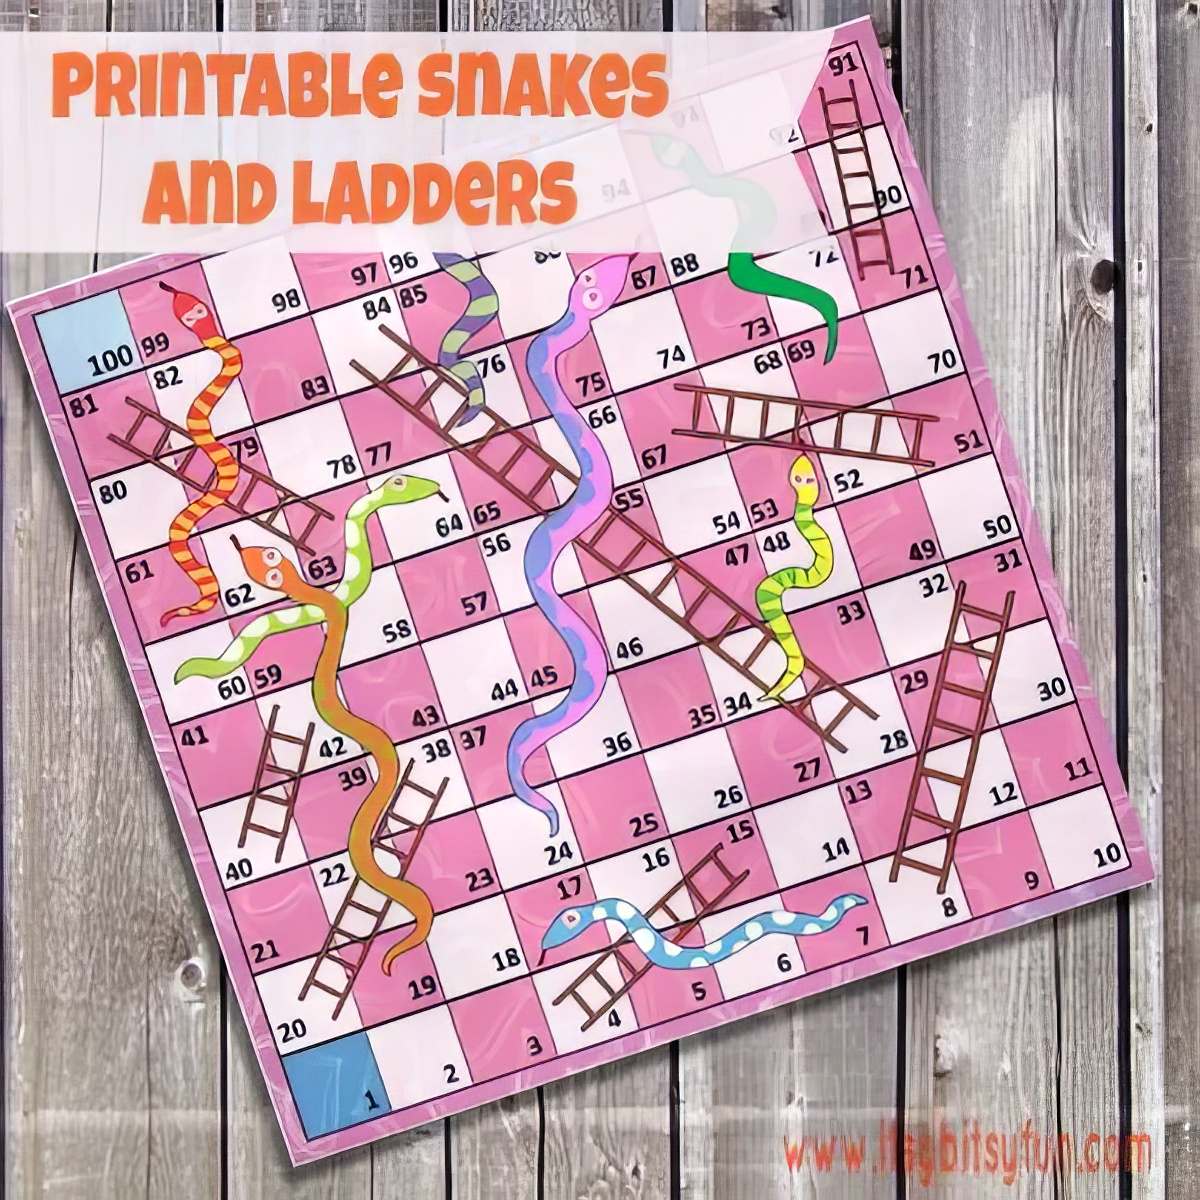 snakes and ladders board games, printable board games